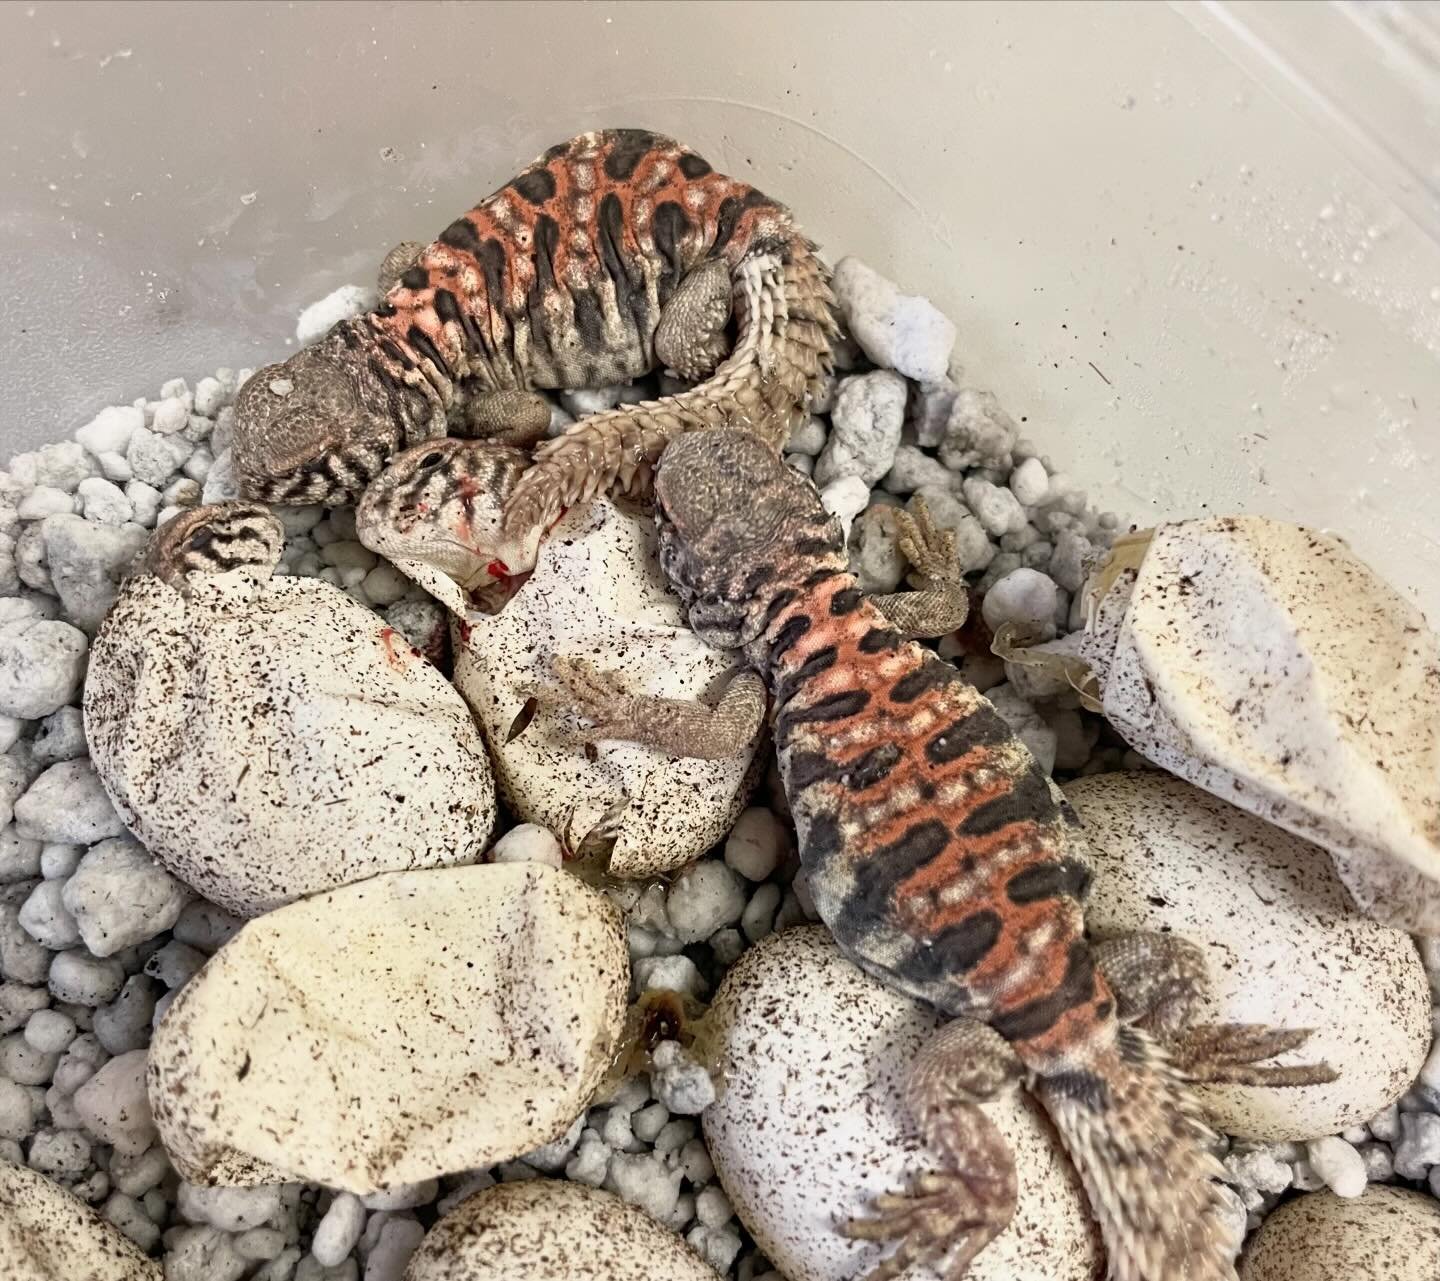 The first clutch of Uromastyx for 2024 have started hatching. #aridsonly #lizards #lizardsofinstagram #reptiles #reptilesofinstagram #uromastyx #uromastyxofinstagram #uromastyxornata #ornateuromastyx #herpetoculture